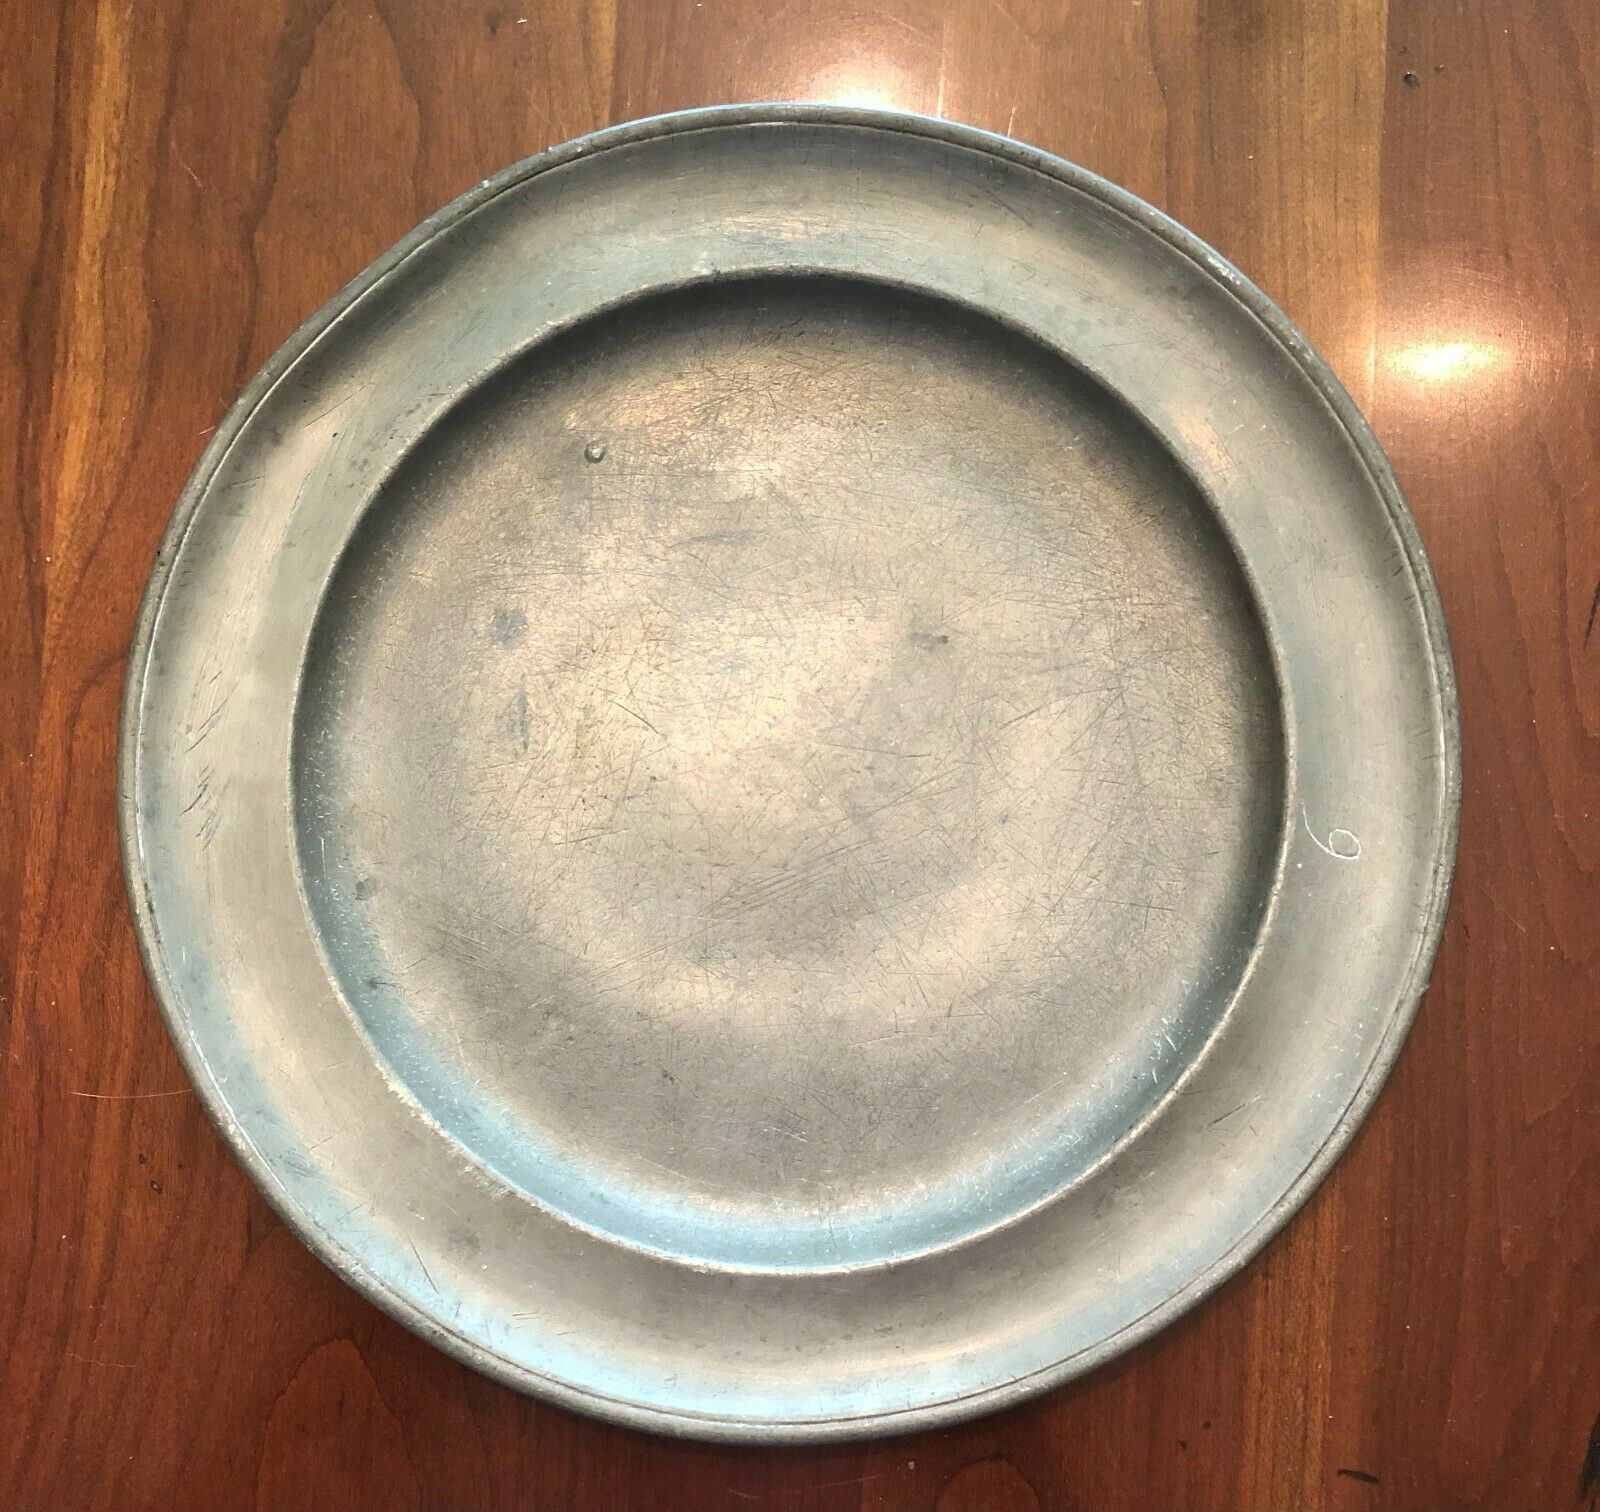 Antique Pewter Plate Marked "9"